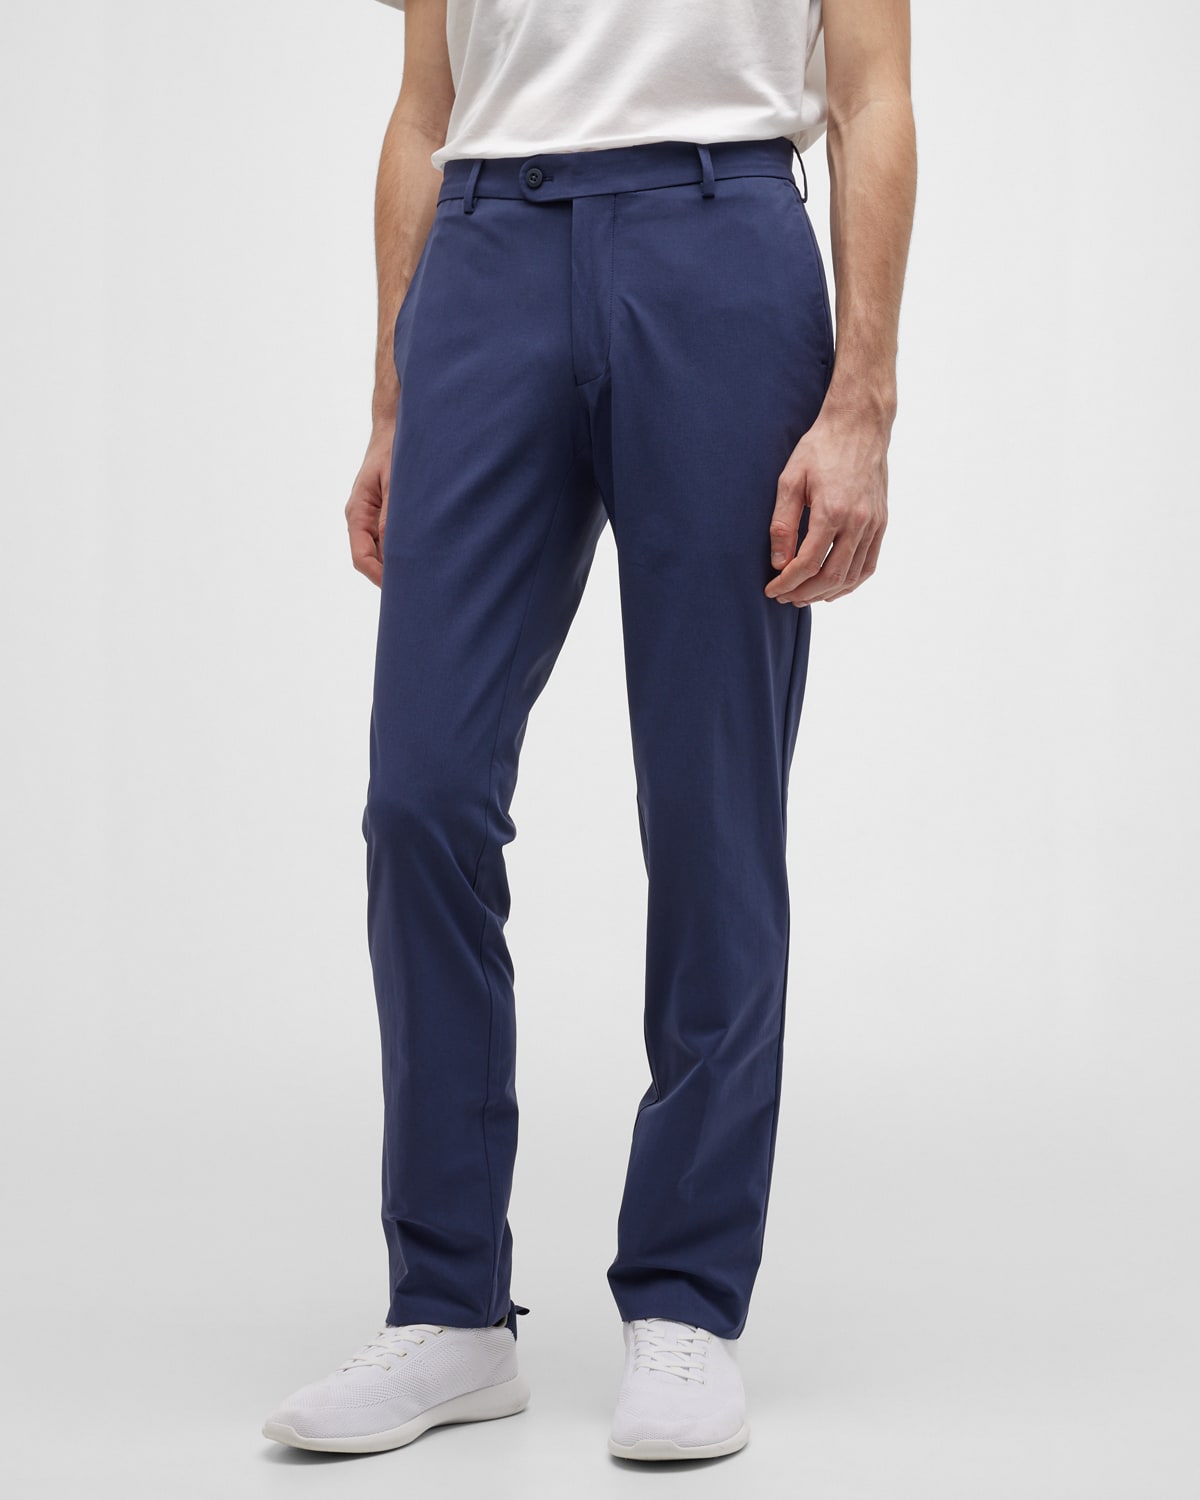 Shop Peter Millar Men's Surge Performance Stretch Trousers In Navy